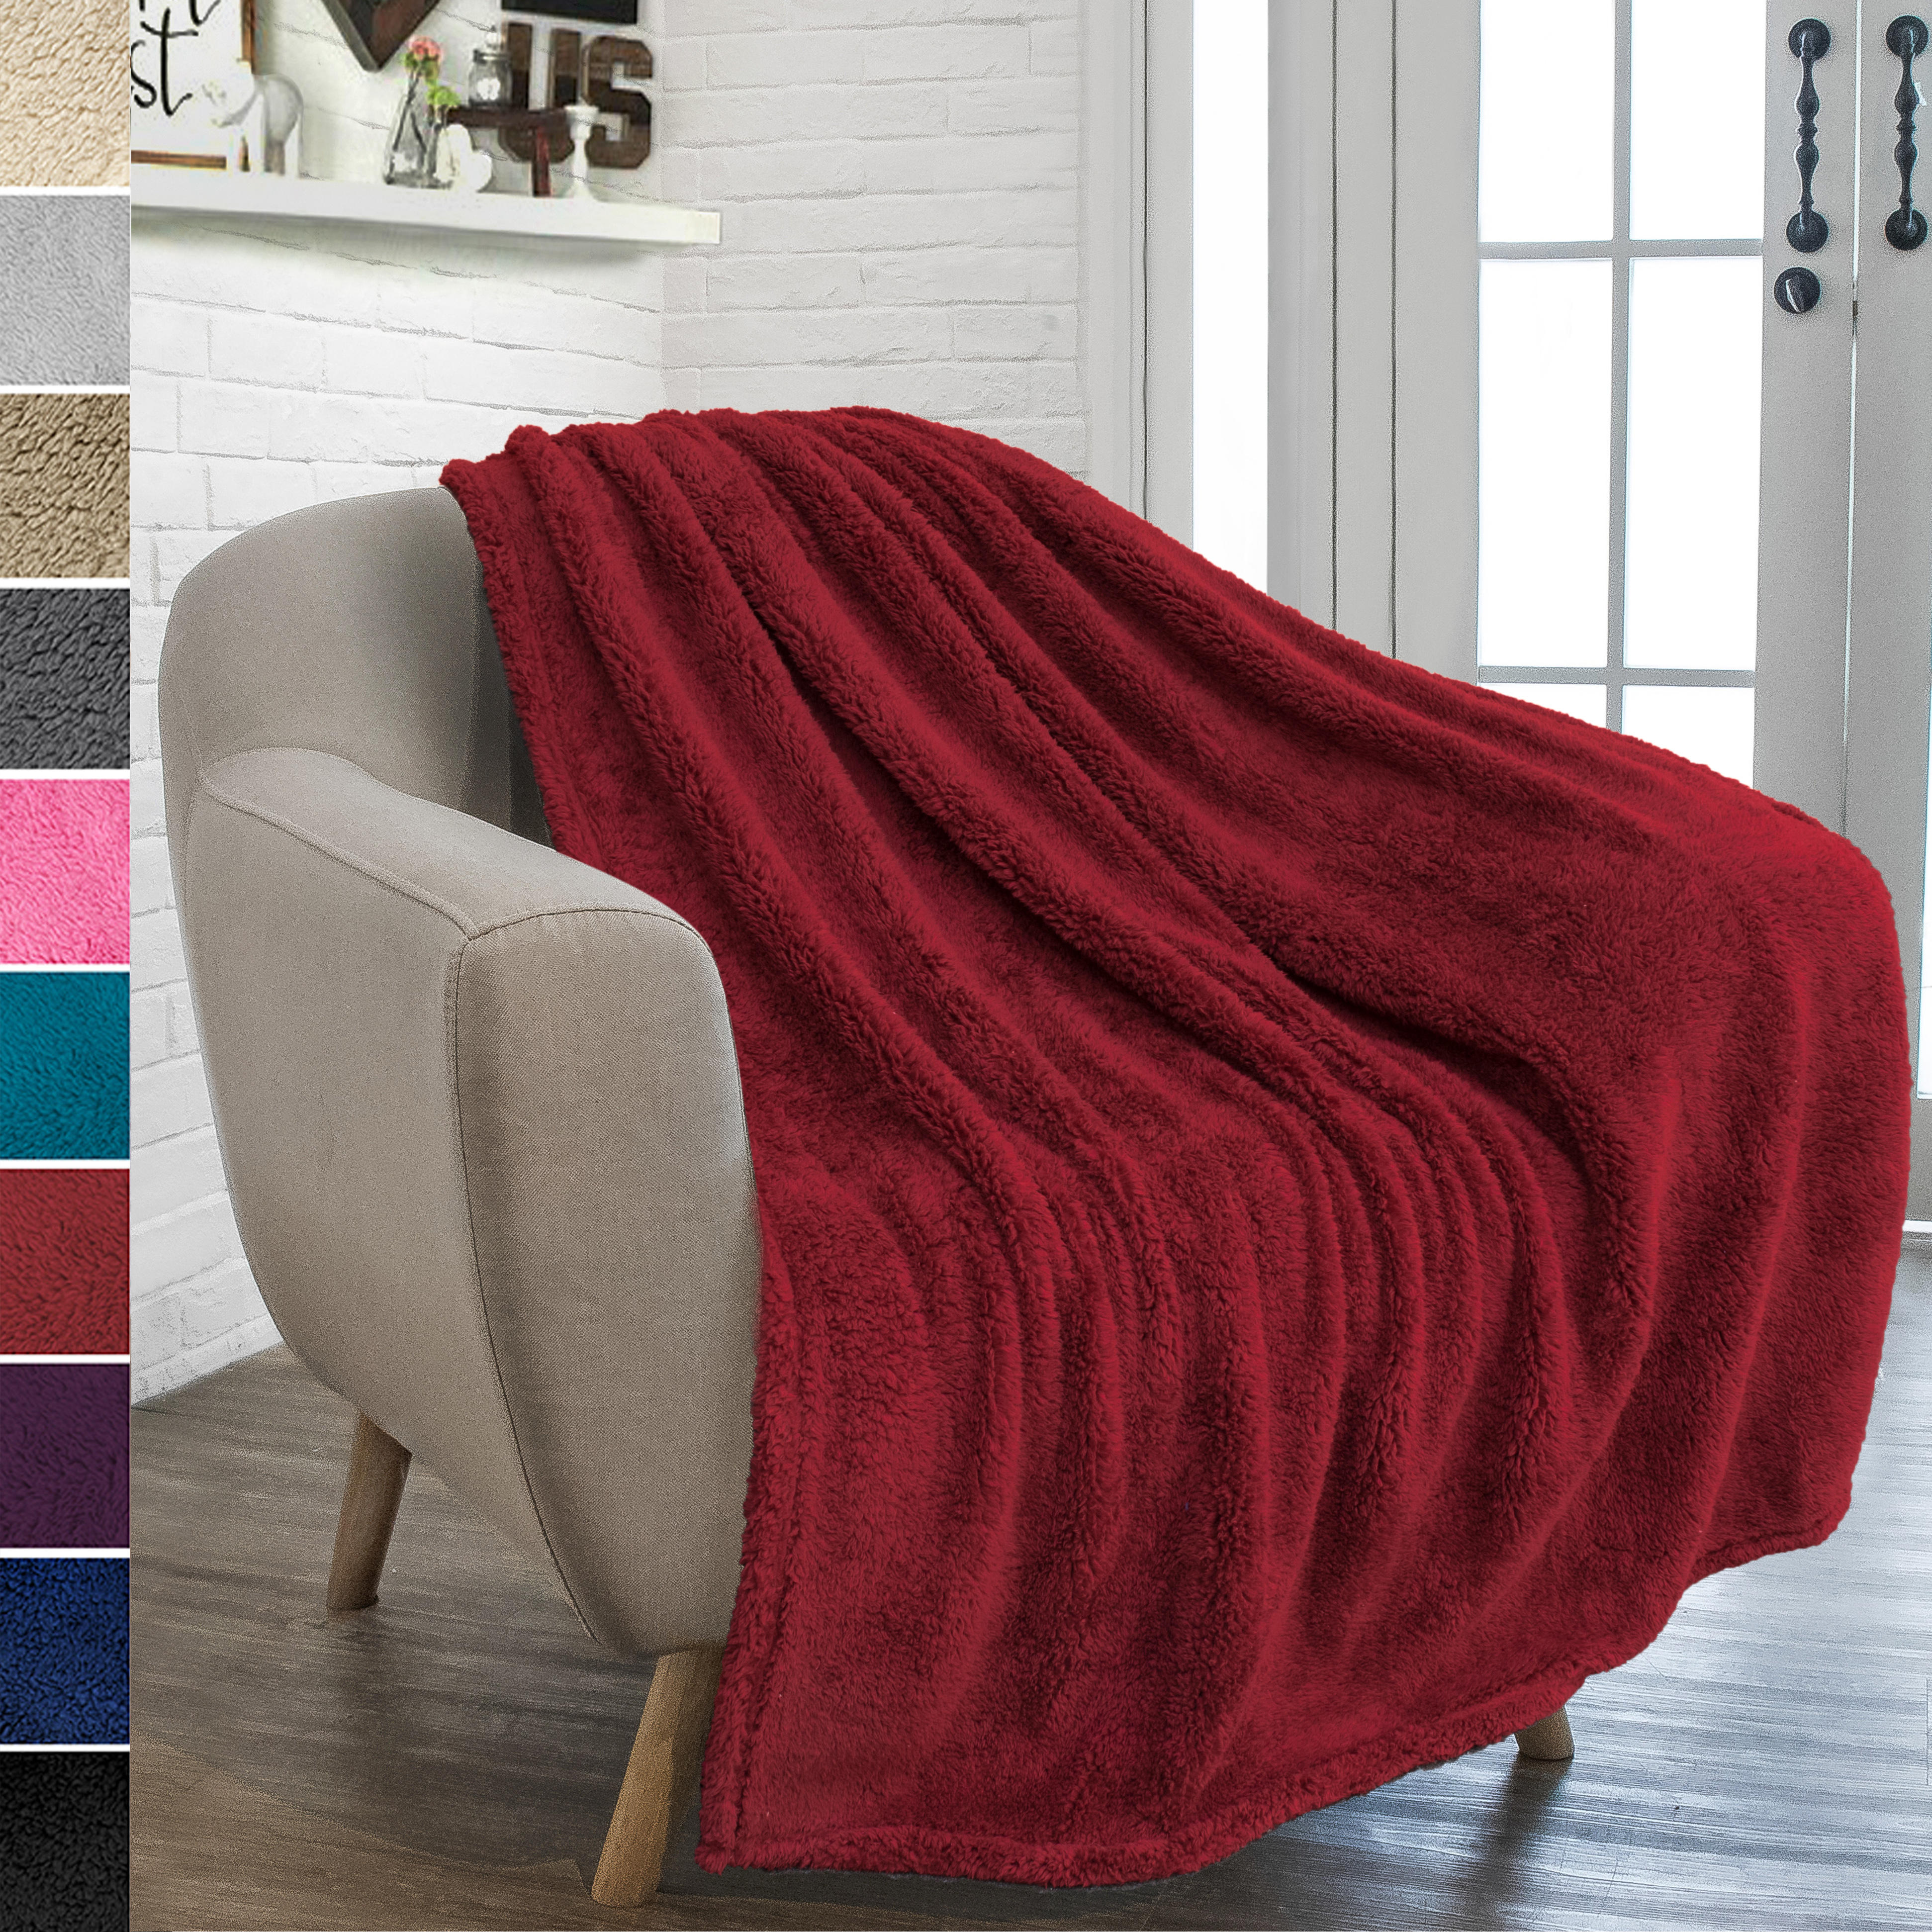 Blanket Throw-African Culture Sofa Blanket QNN412 Adult-Sherpa Fleece Blanket Fuzzy Soft Microfiber Blanketed Gifts 